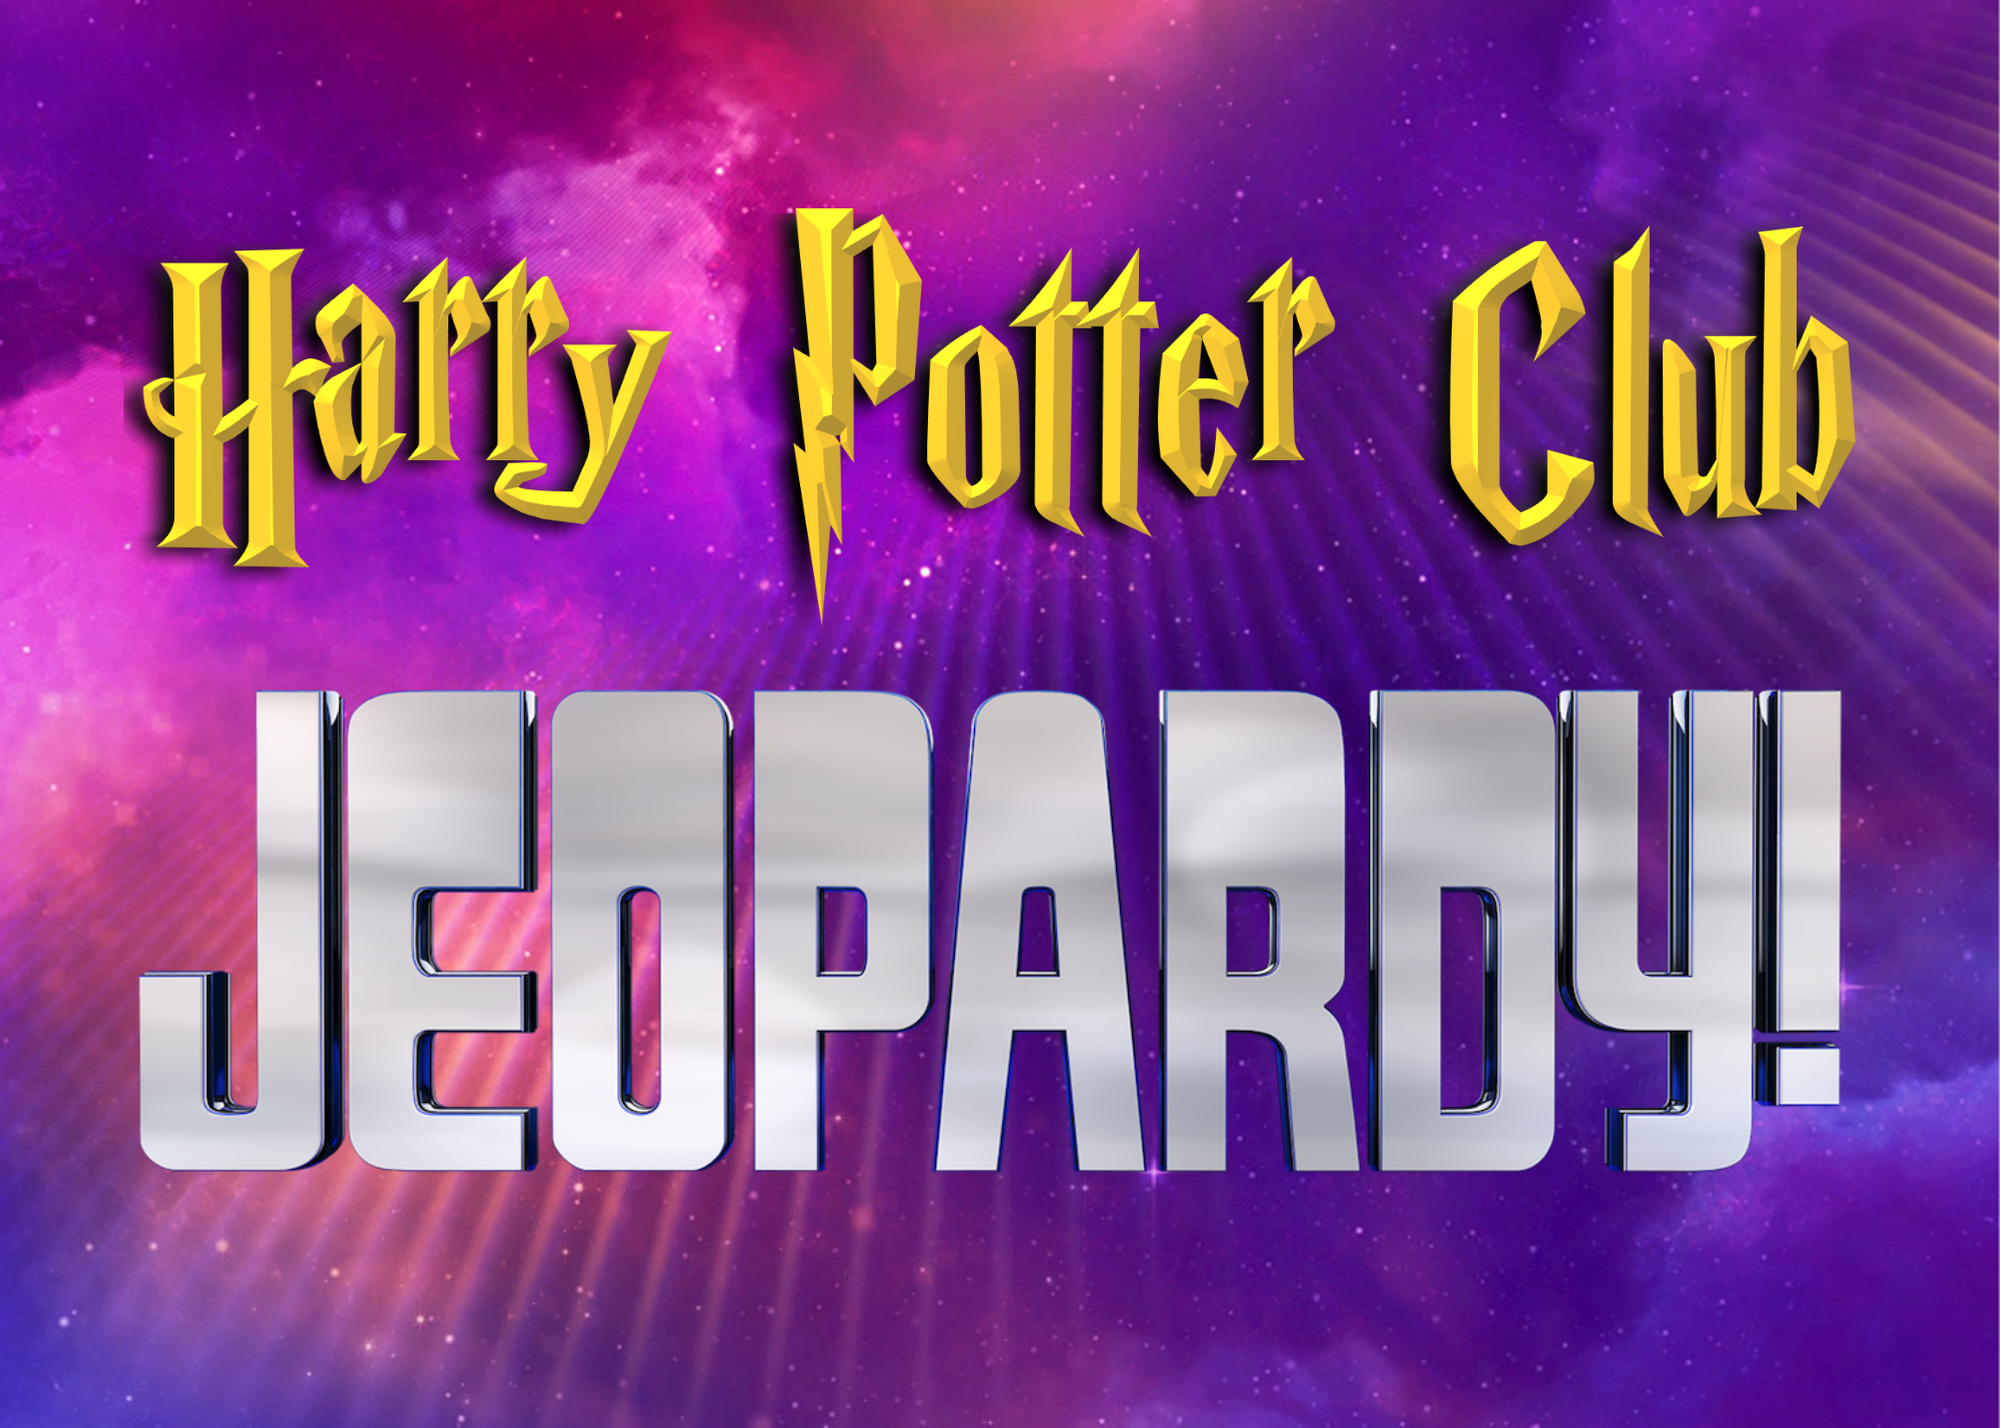 A pink and purple clouds and galaxy background with the text "Harry Potter Club Jeopardy!"